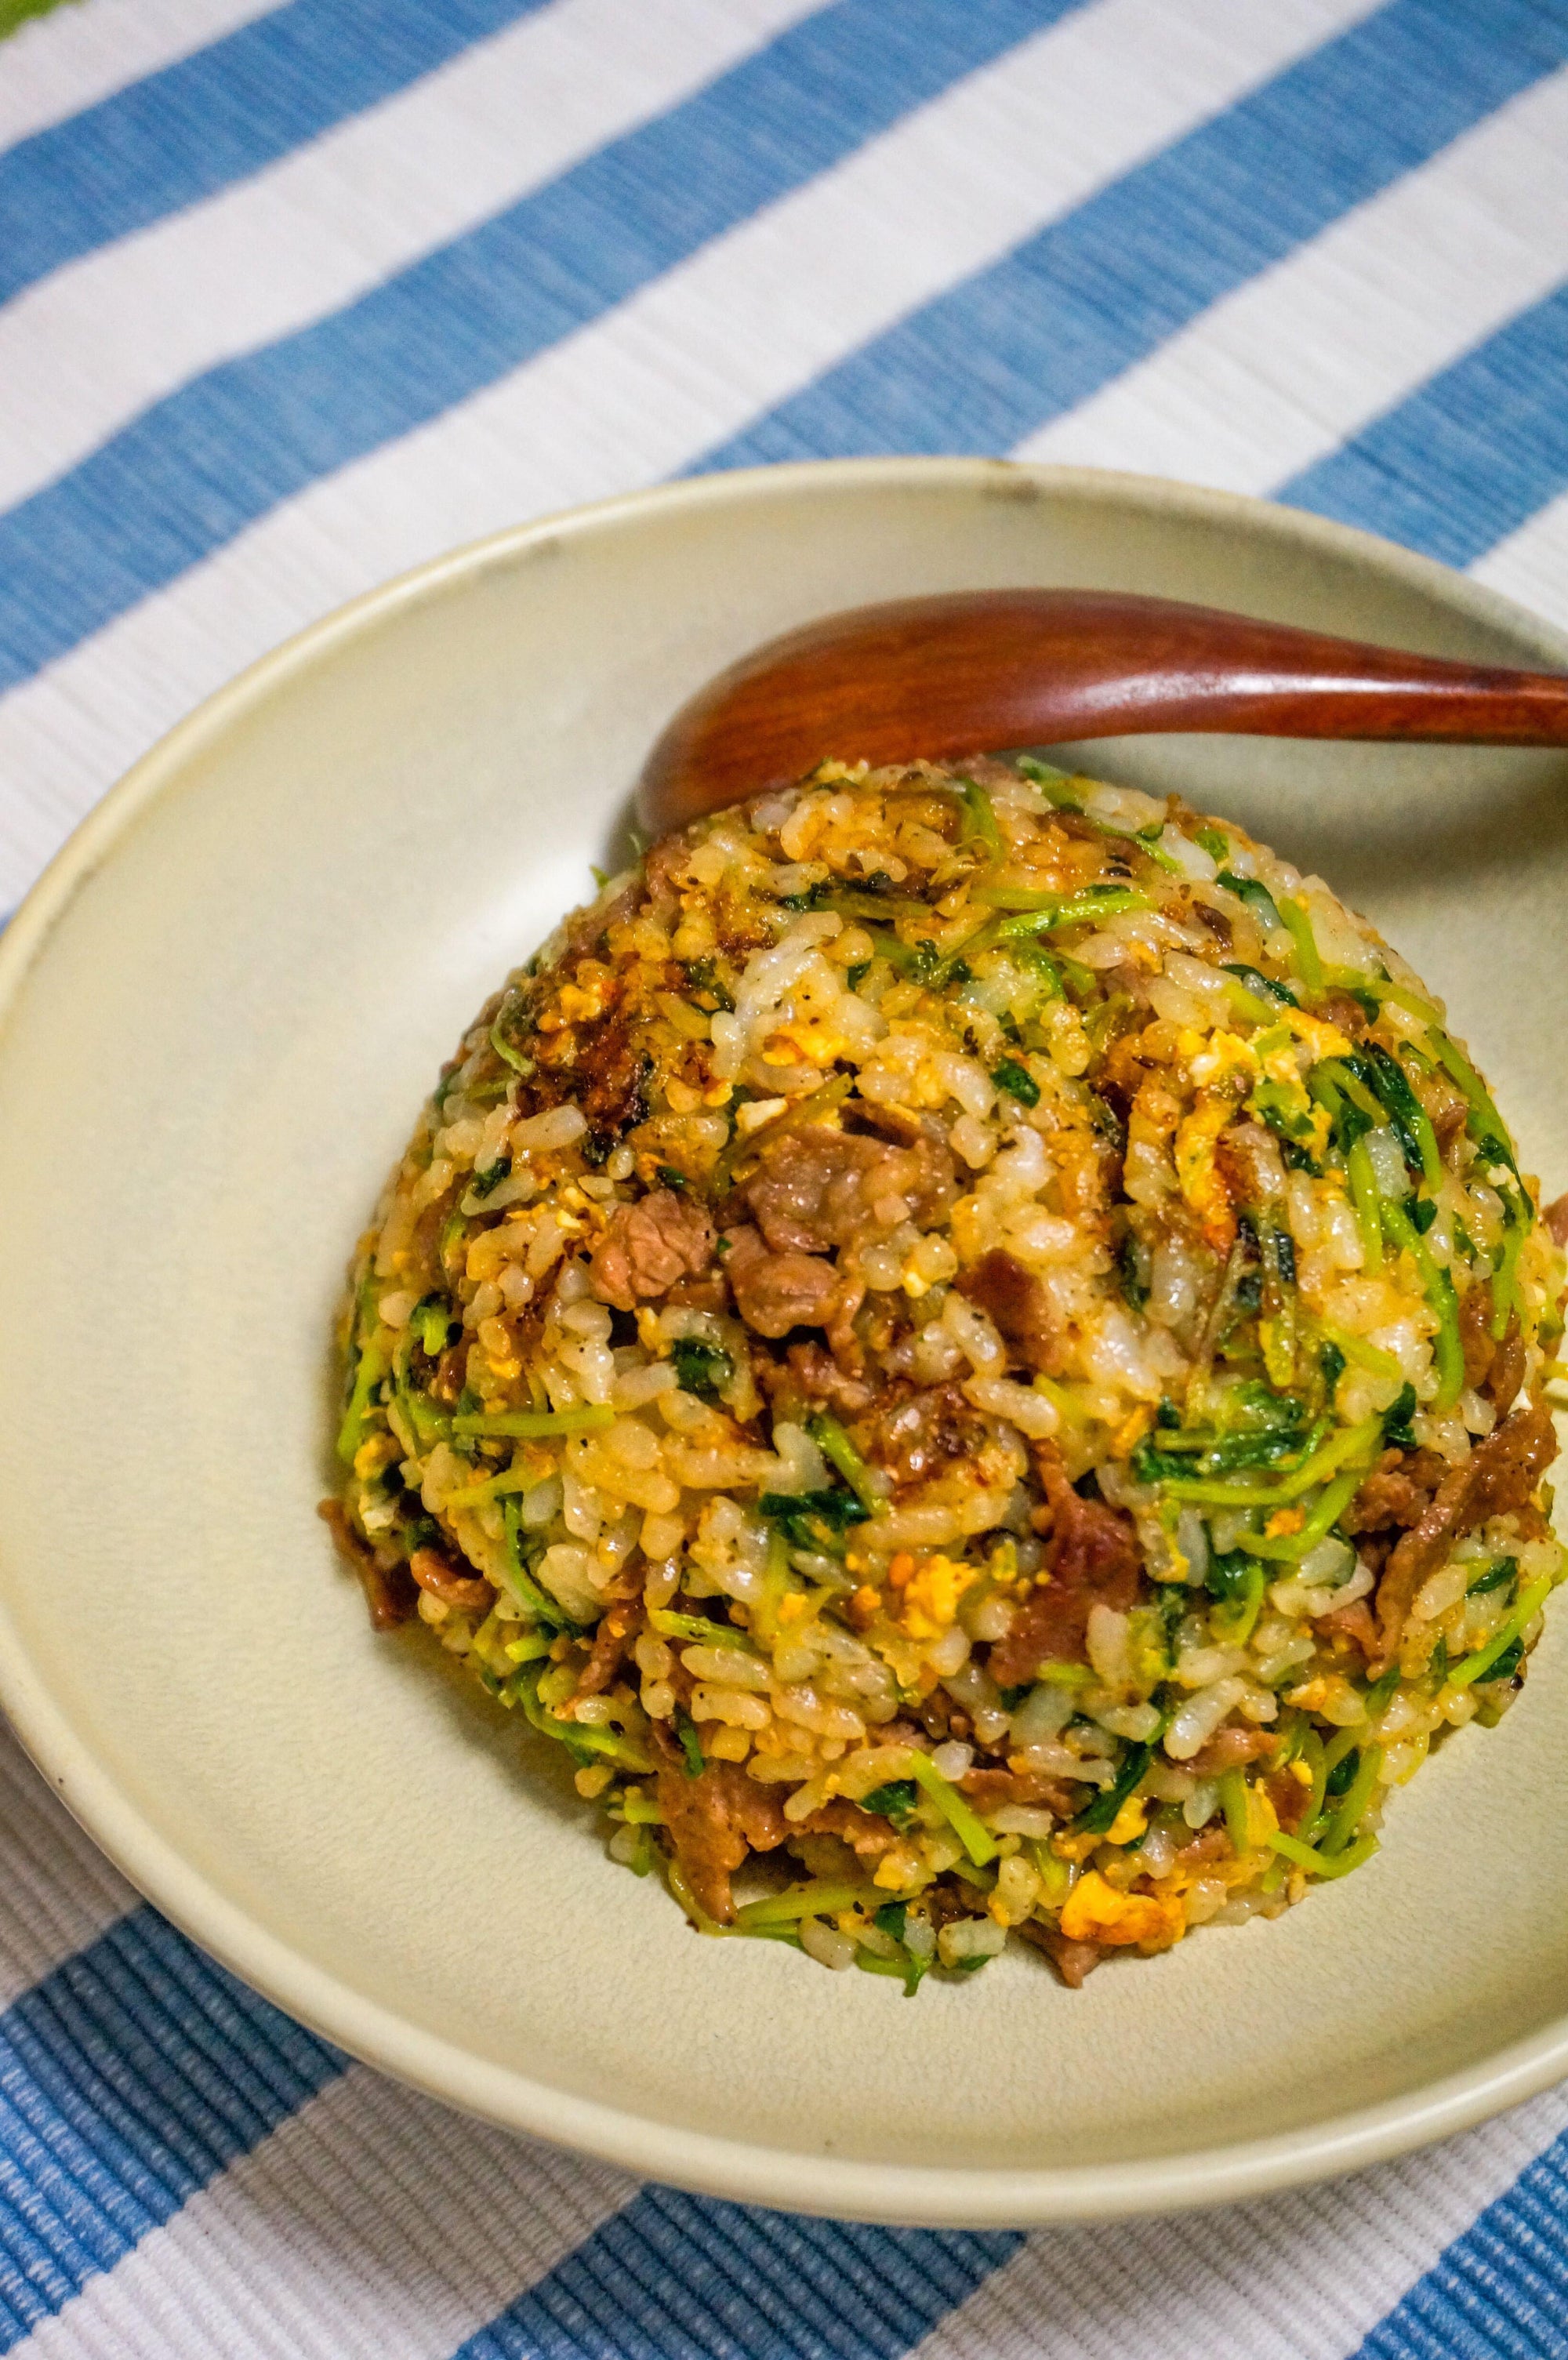 RECIPE: Grilled Beef and Green Onion Fried Rice